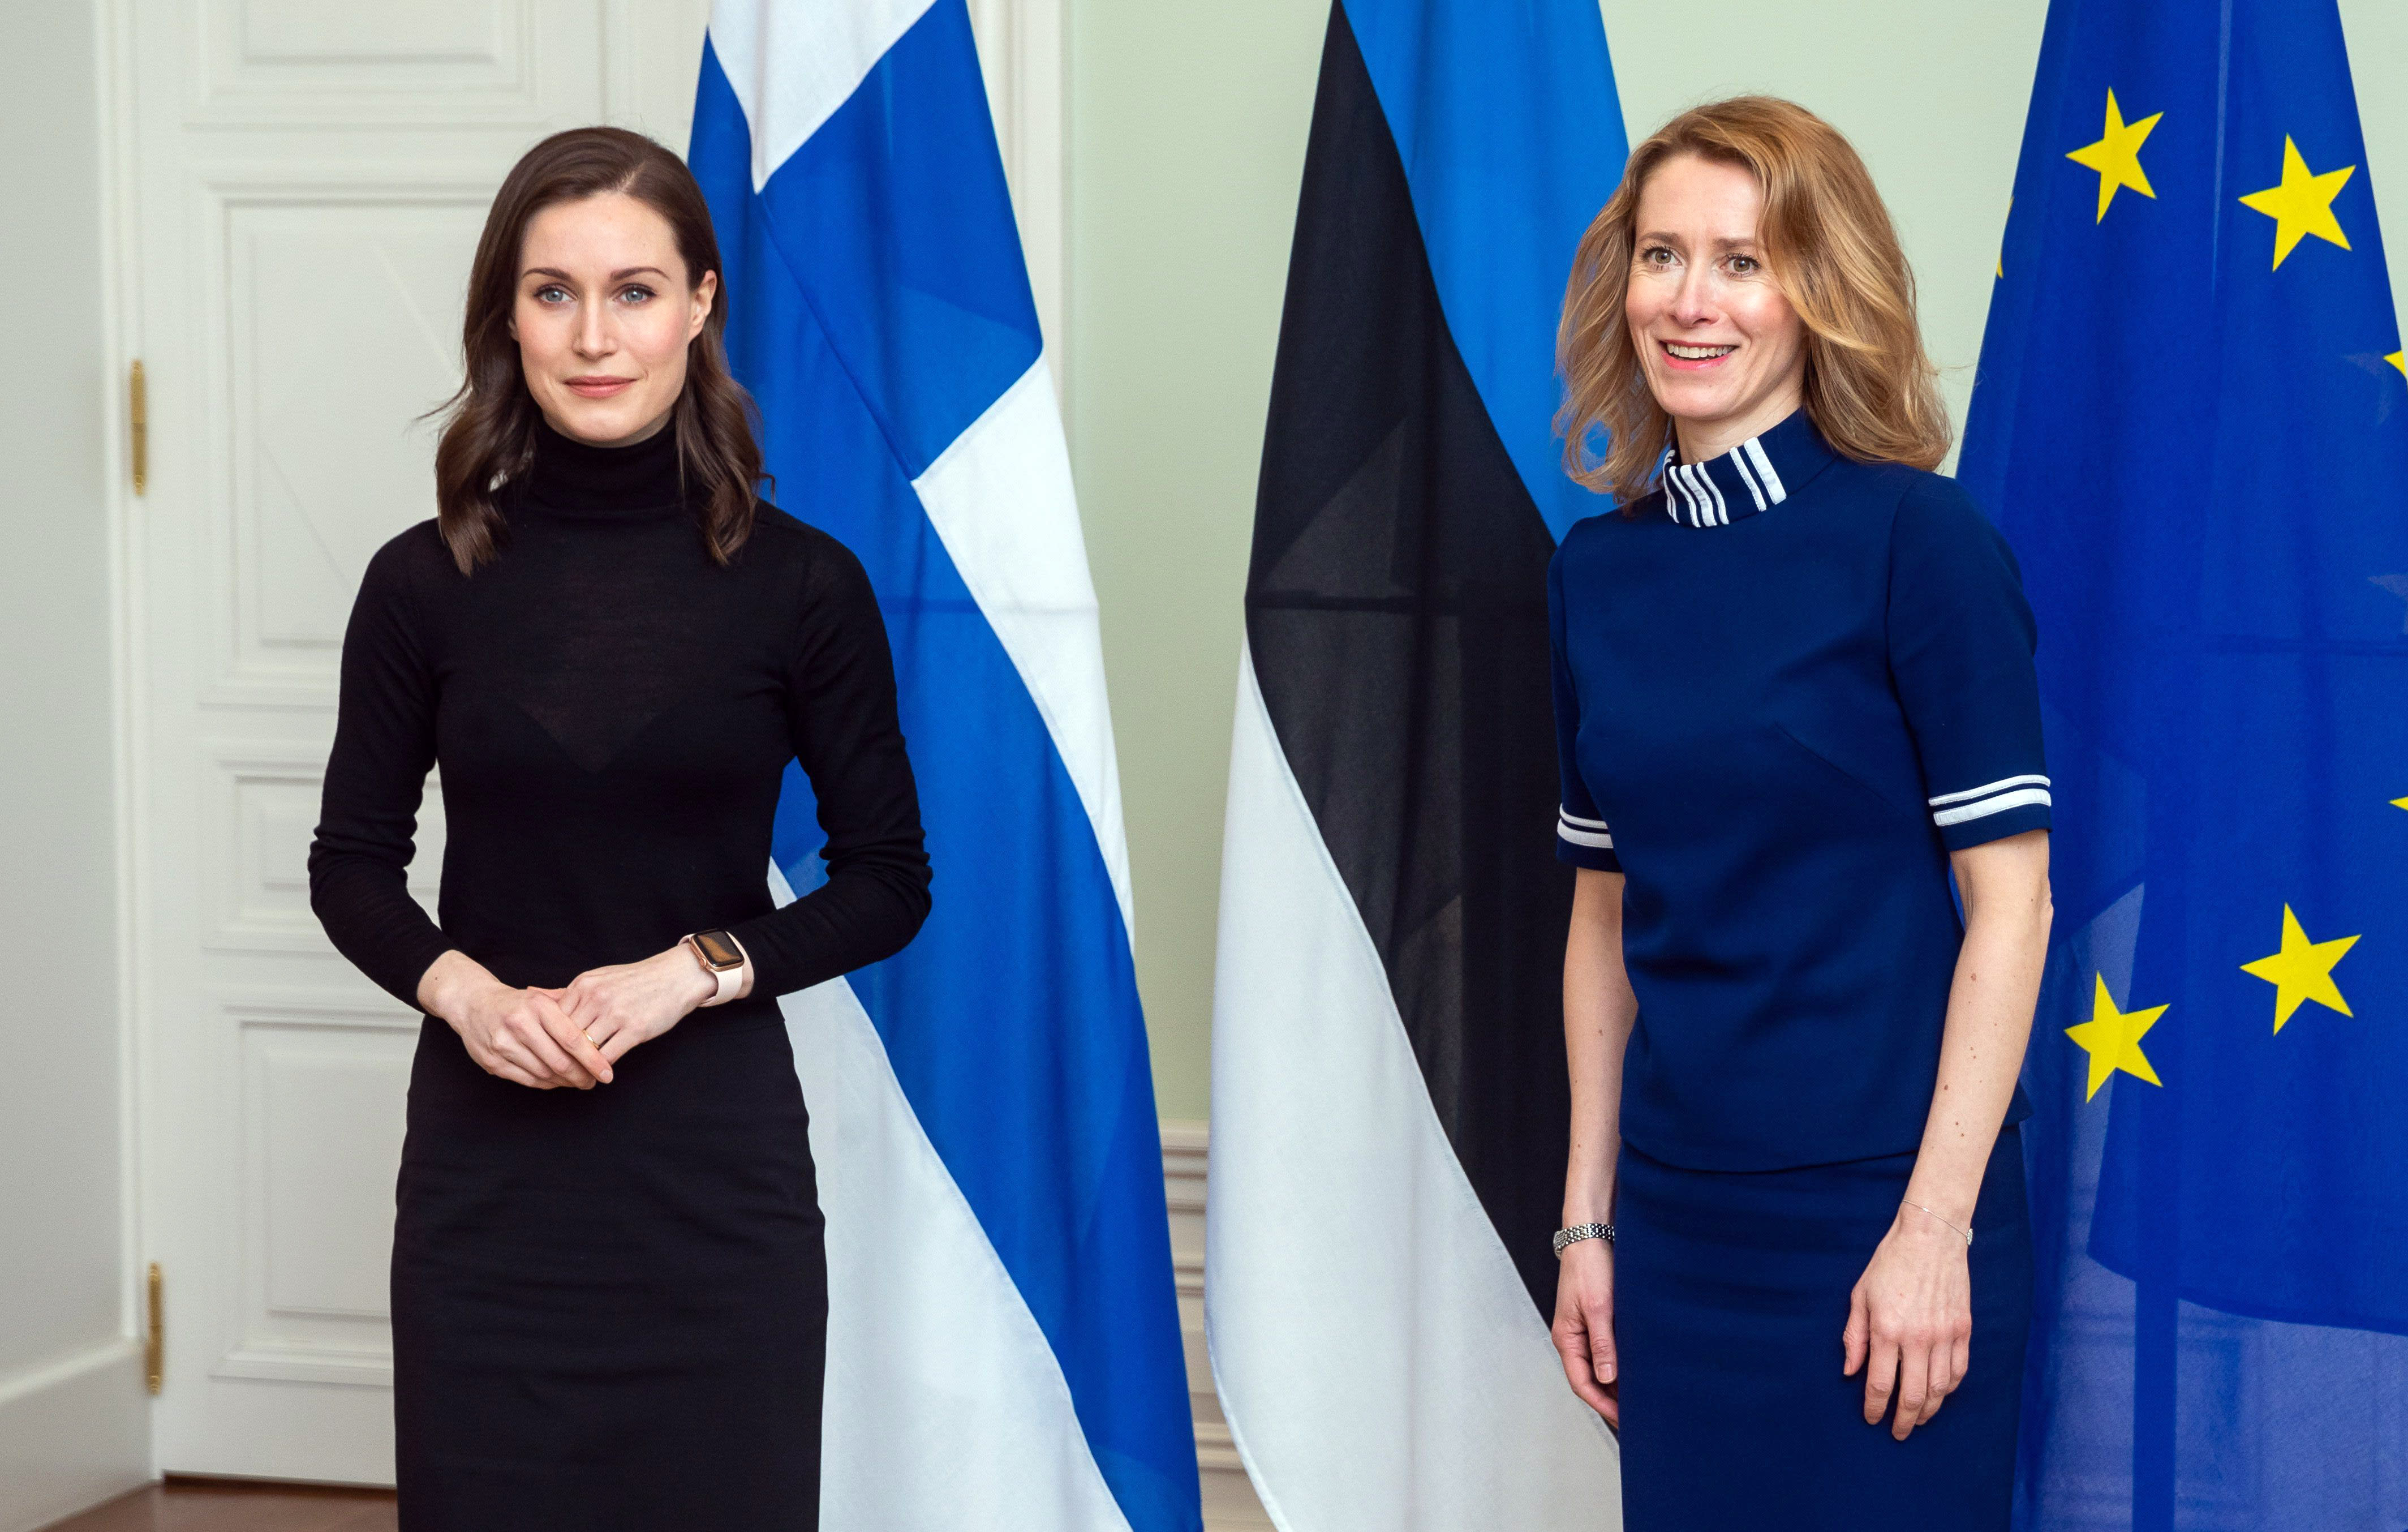 The prime ministers of Finland and Estonia are meeting in the middle of a world that has changed as the countries’ bonds tighten